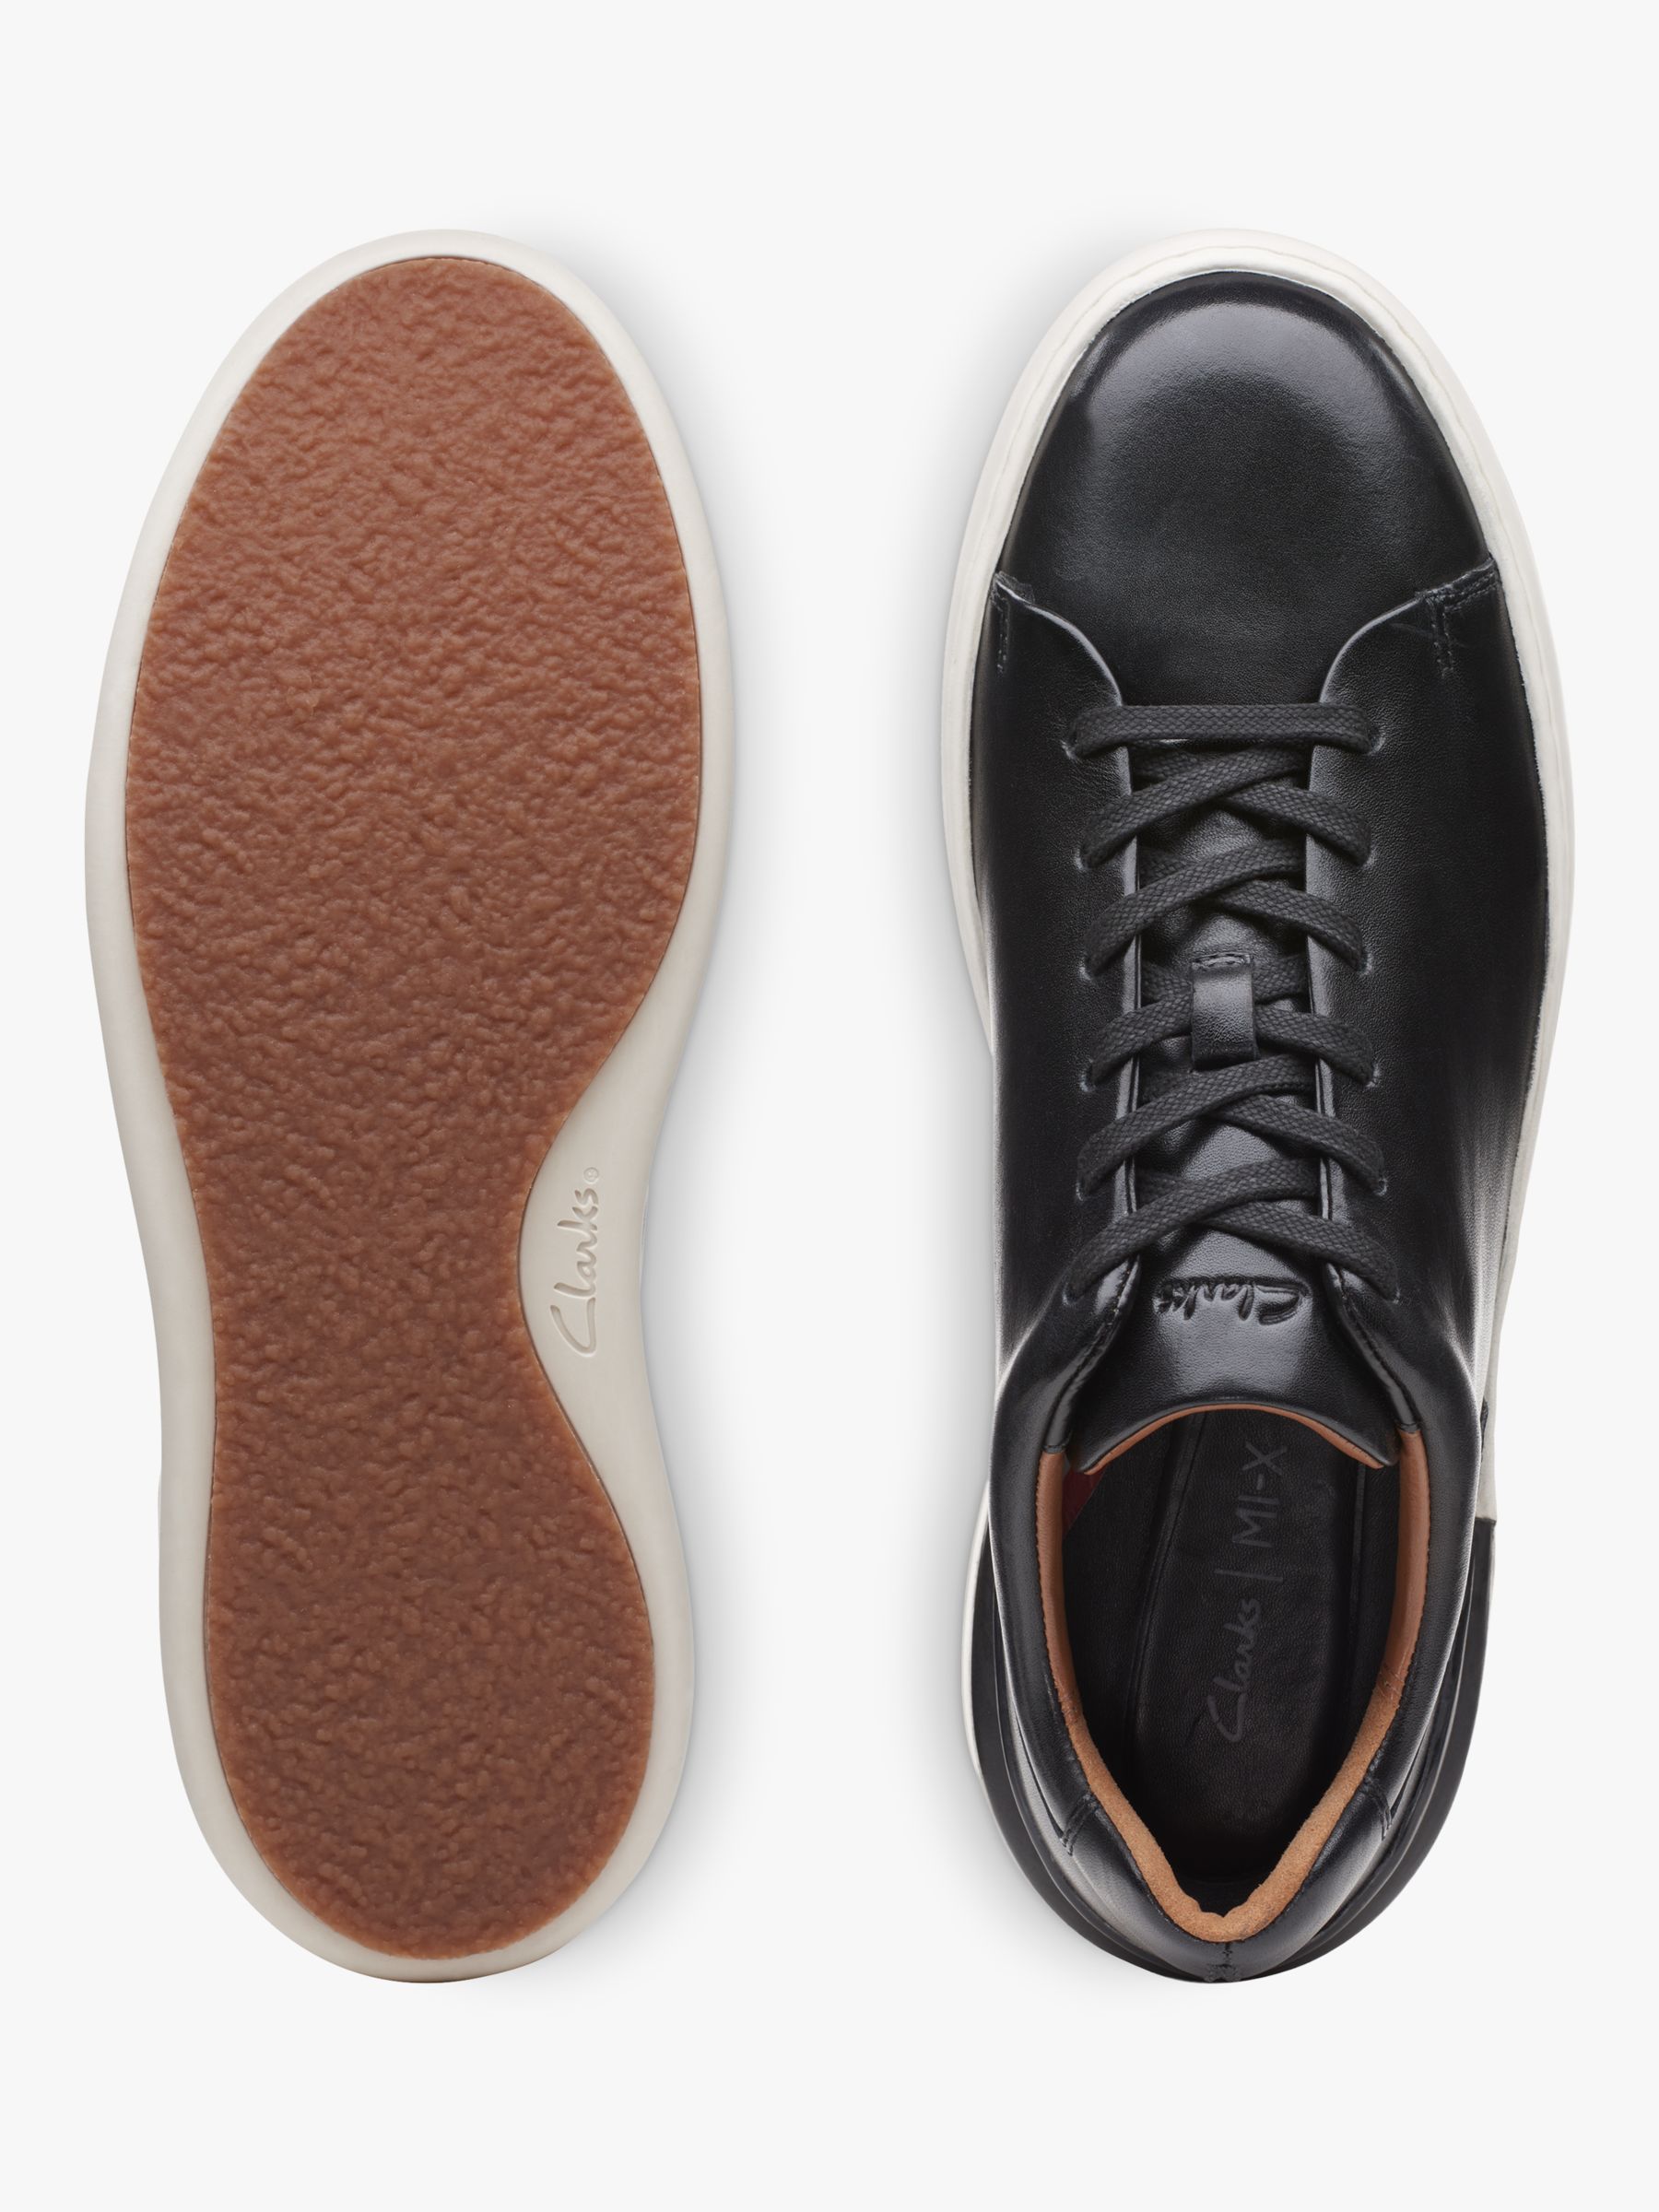 Clarks CourtLite Lace Up Leather Trainers, Black at John Lewis & Partners